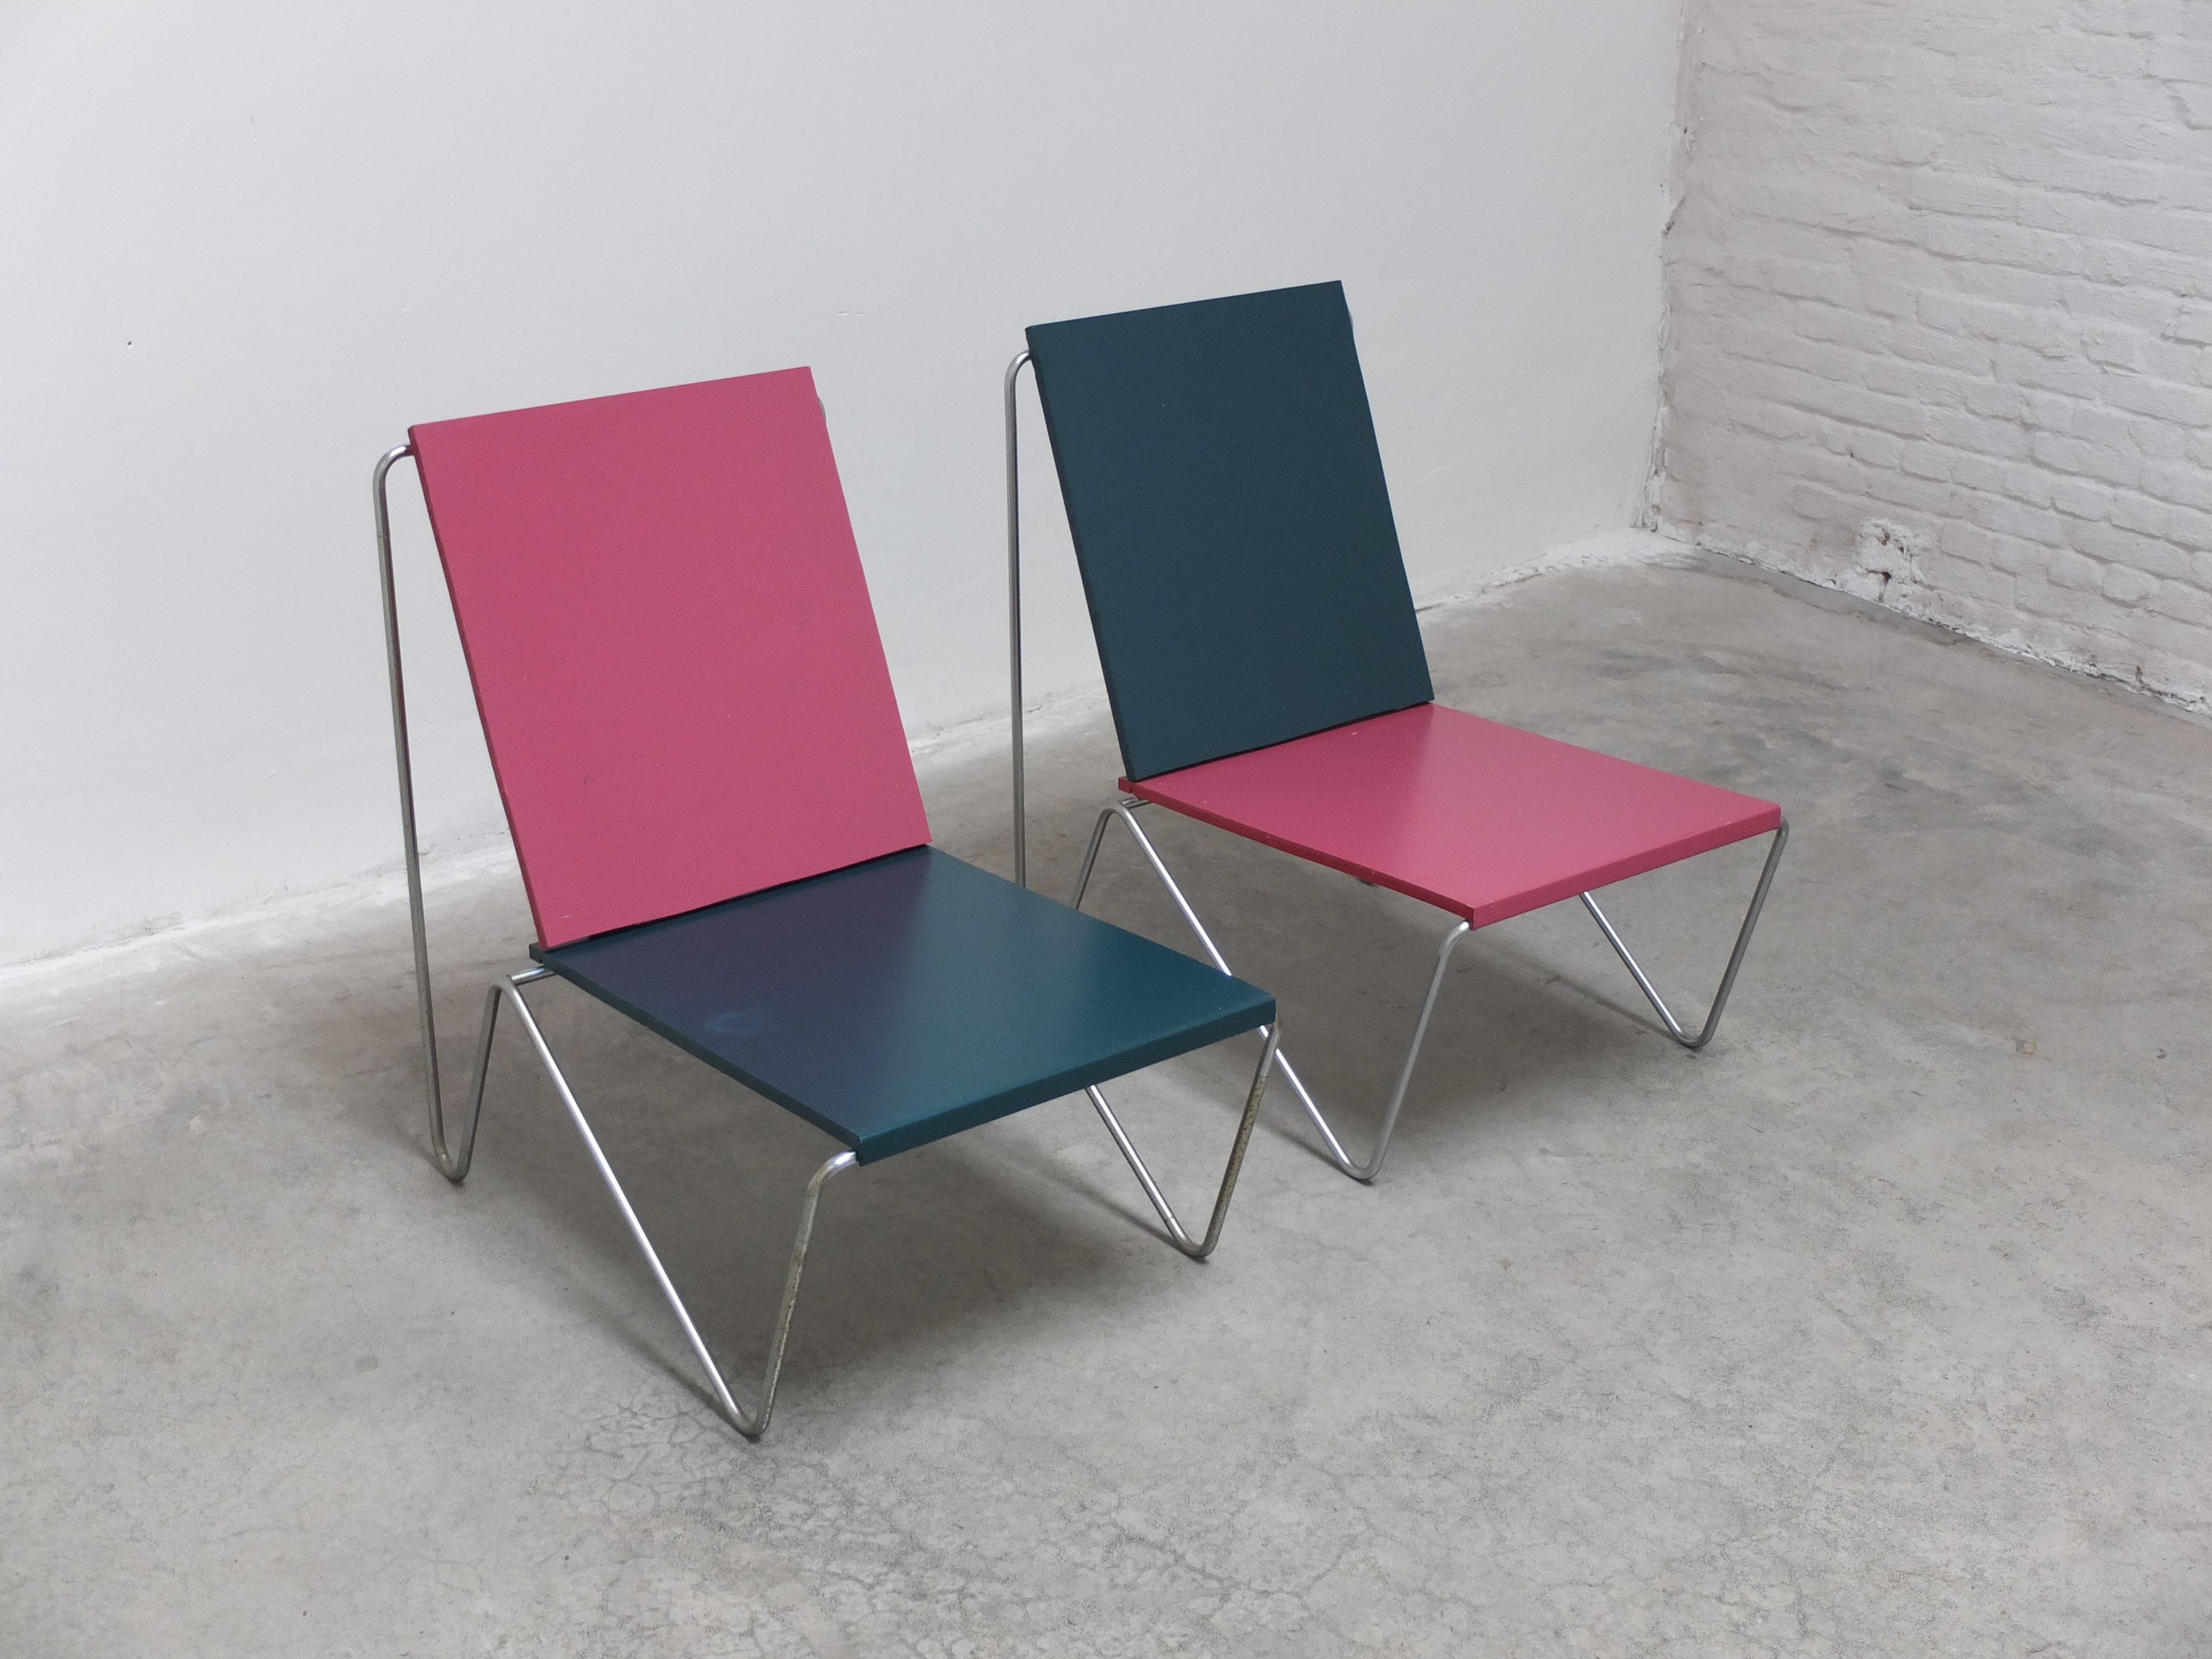 Scandinavian Modern Unique Pair of 'Bachelor' Chairs by Verner Panton for Fritz Hansen, 1971 For Sale